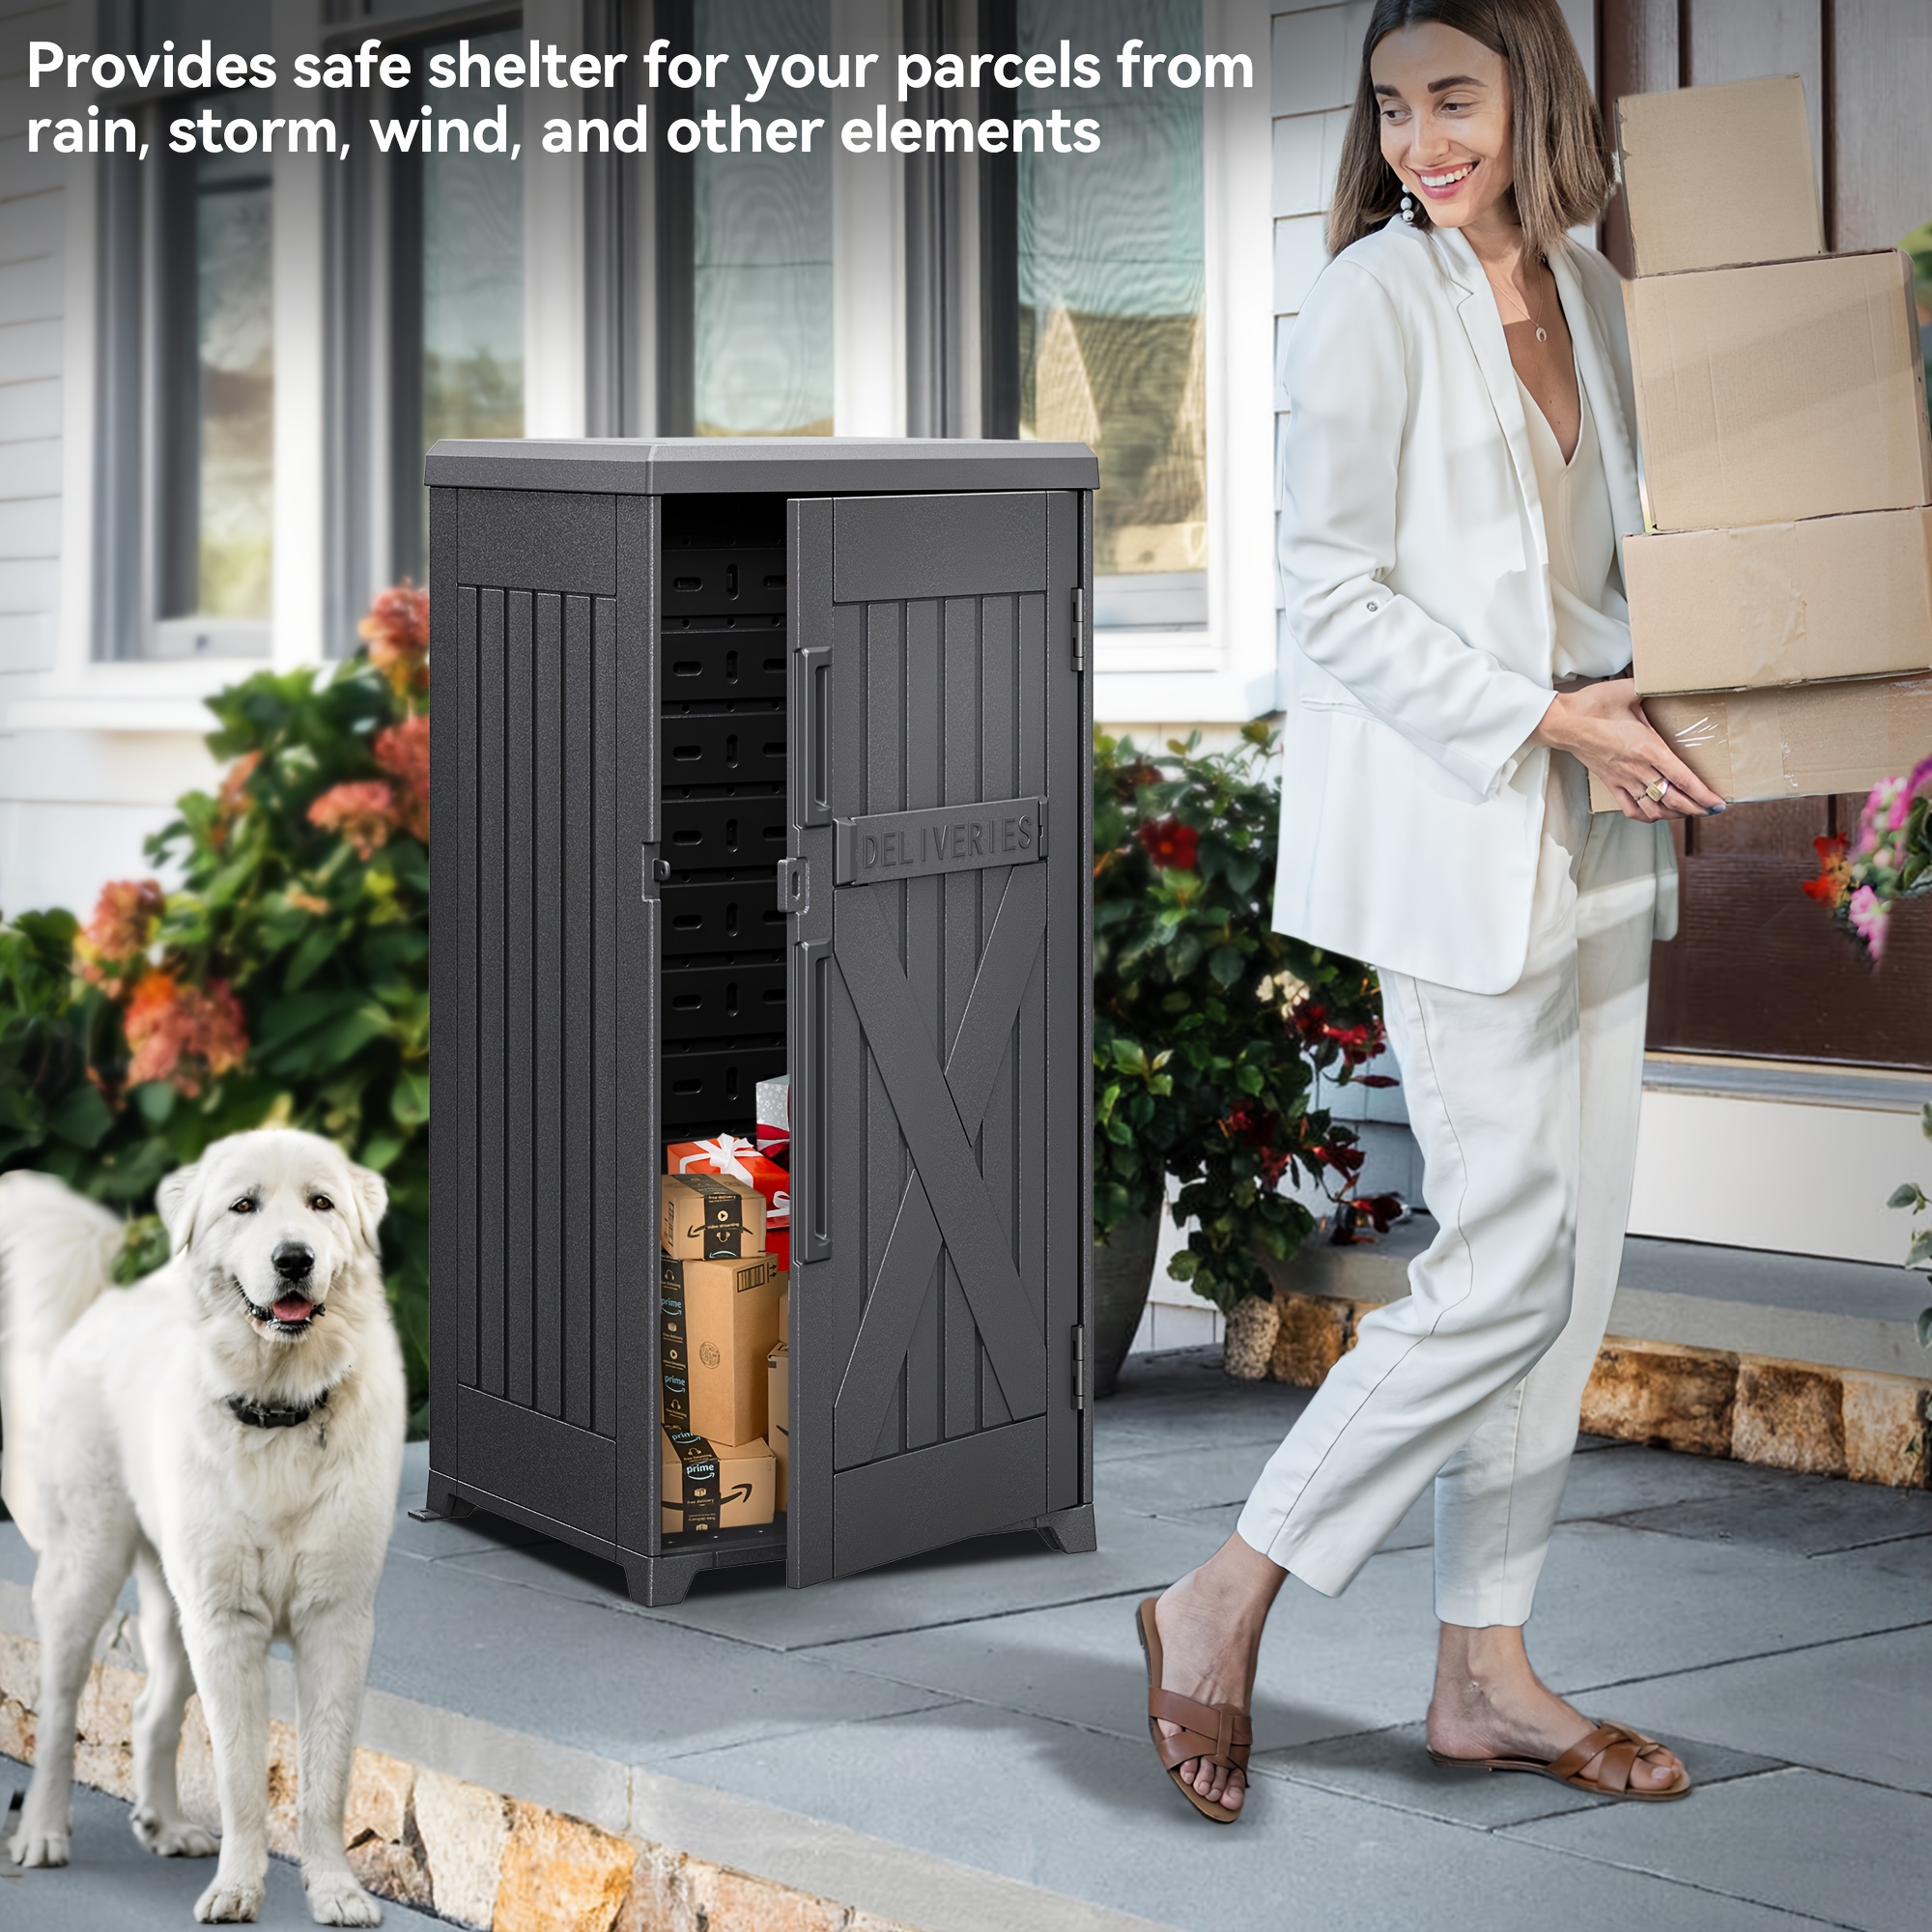 

Quoyad 60 Gallon Large Package Delivery And Storage Box With Lockable Secure, Double-wall Resin Outdoor Package Delivery And Waterproof Deck Box For Porch, Curbside, 8.5 Cubic Feet, Gray